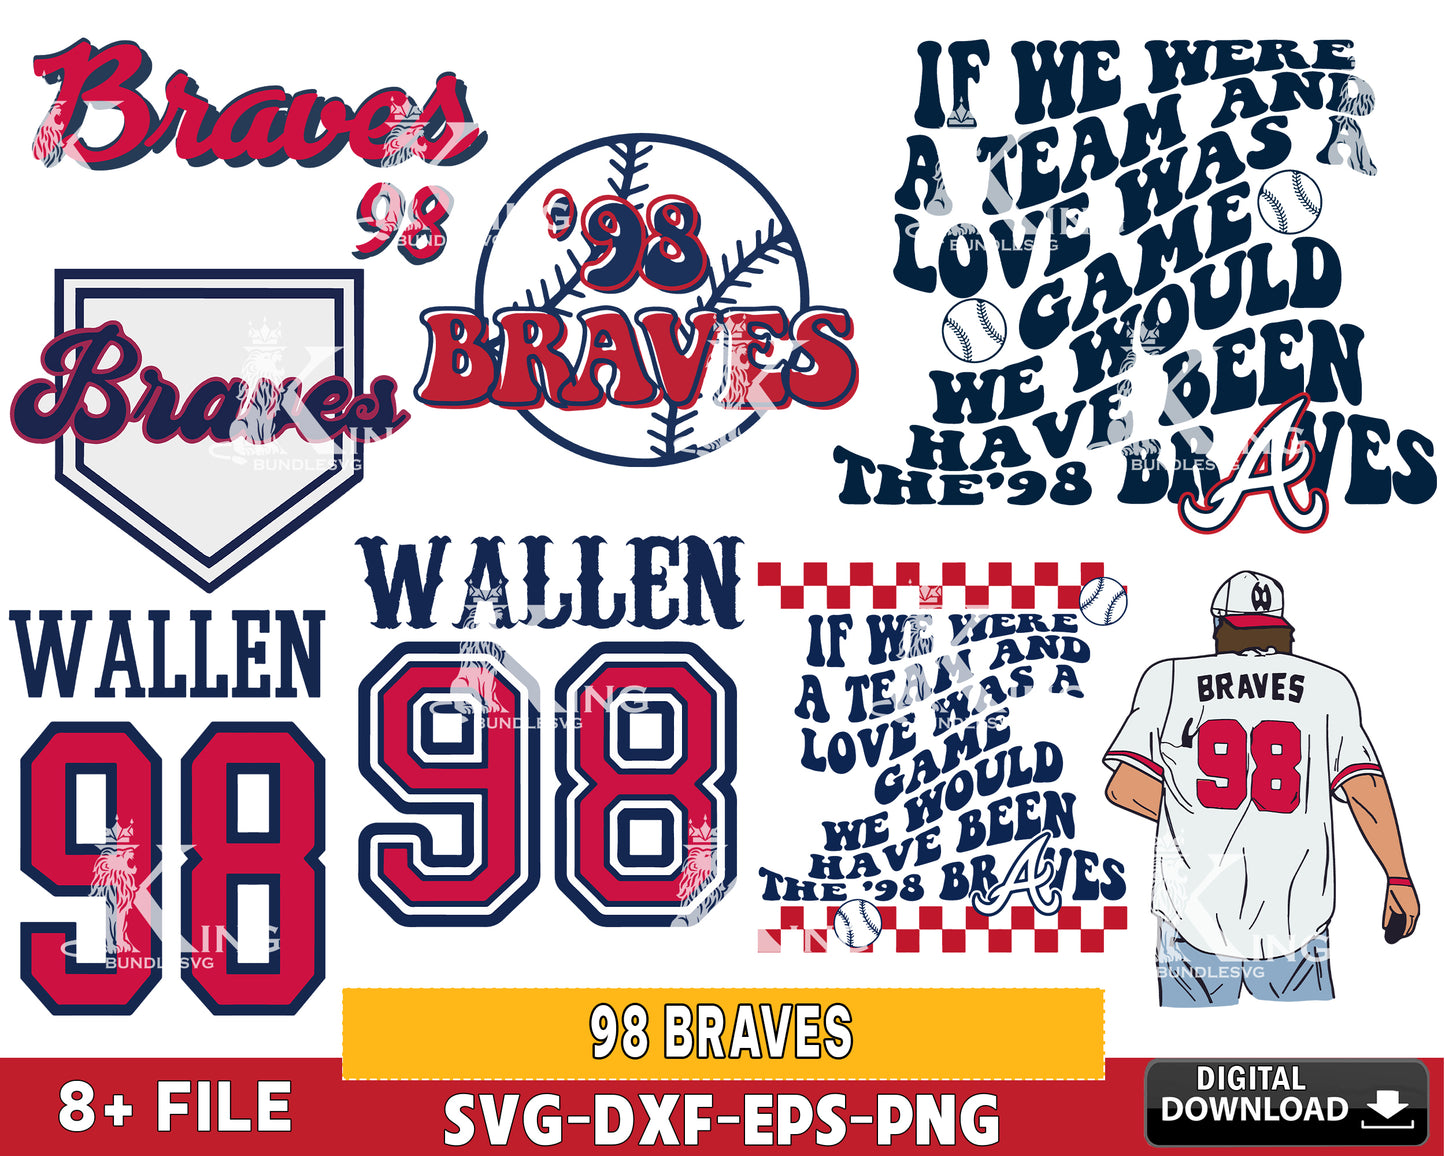 98 Braves svg , If We We’Re A Team Png, Braves 98 wallen svg, Morgan Song SVG DXF EPS PNG, Cricut, for Cricut, Silhouette, Digital Download , file cut